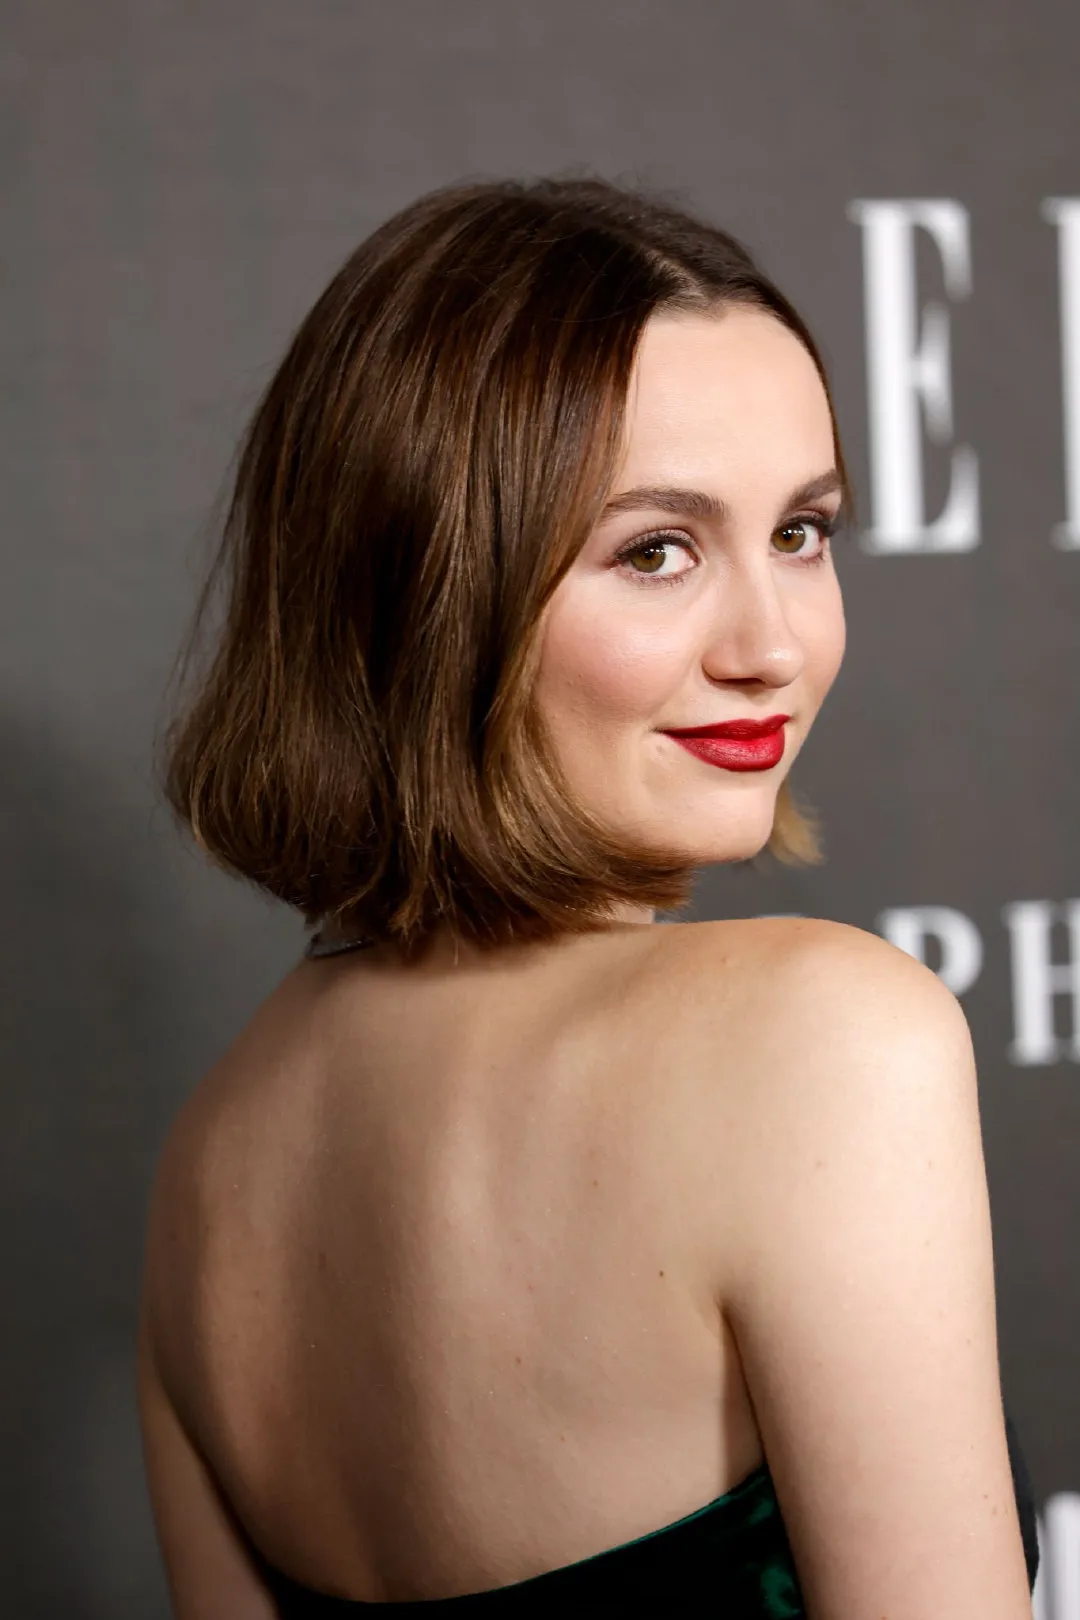 Maude Apatow attends ELLE's 2022 Women in Hollywood Event | FMV6